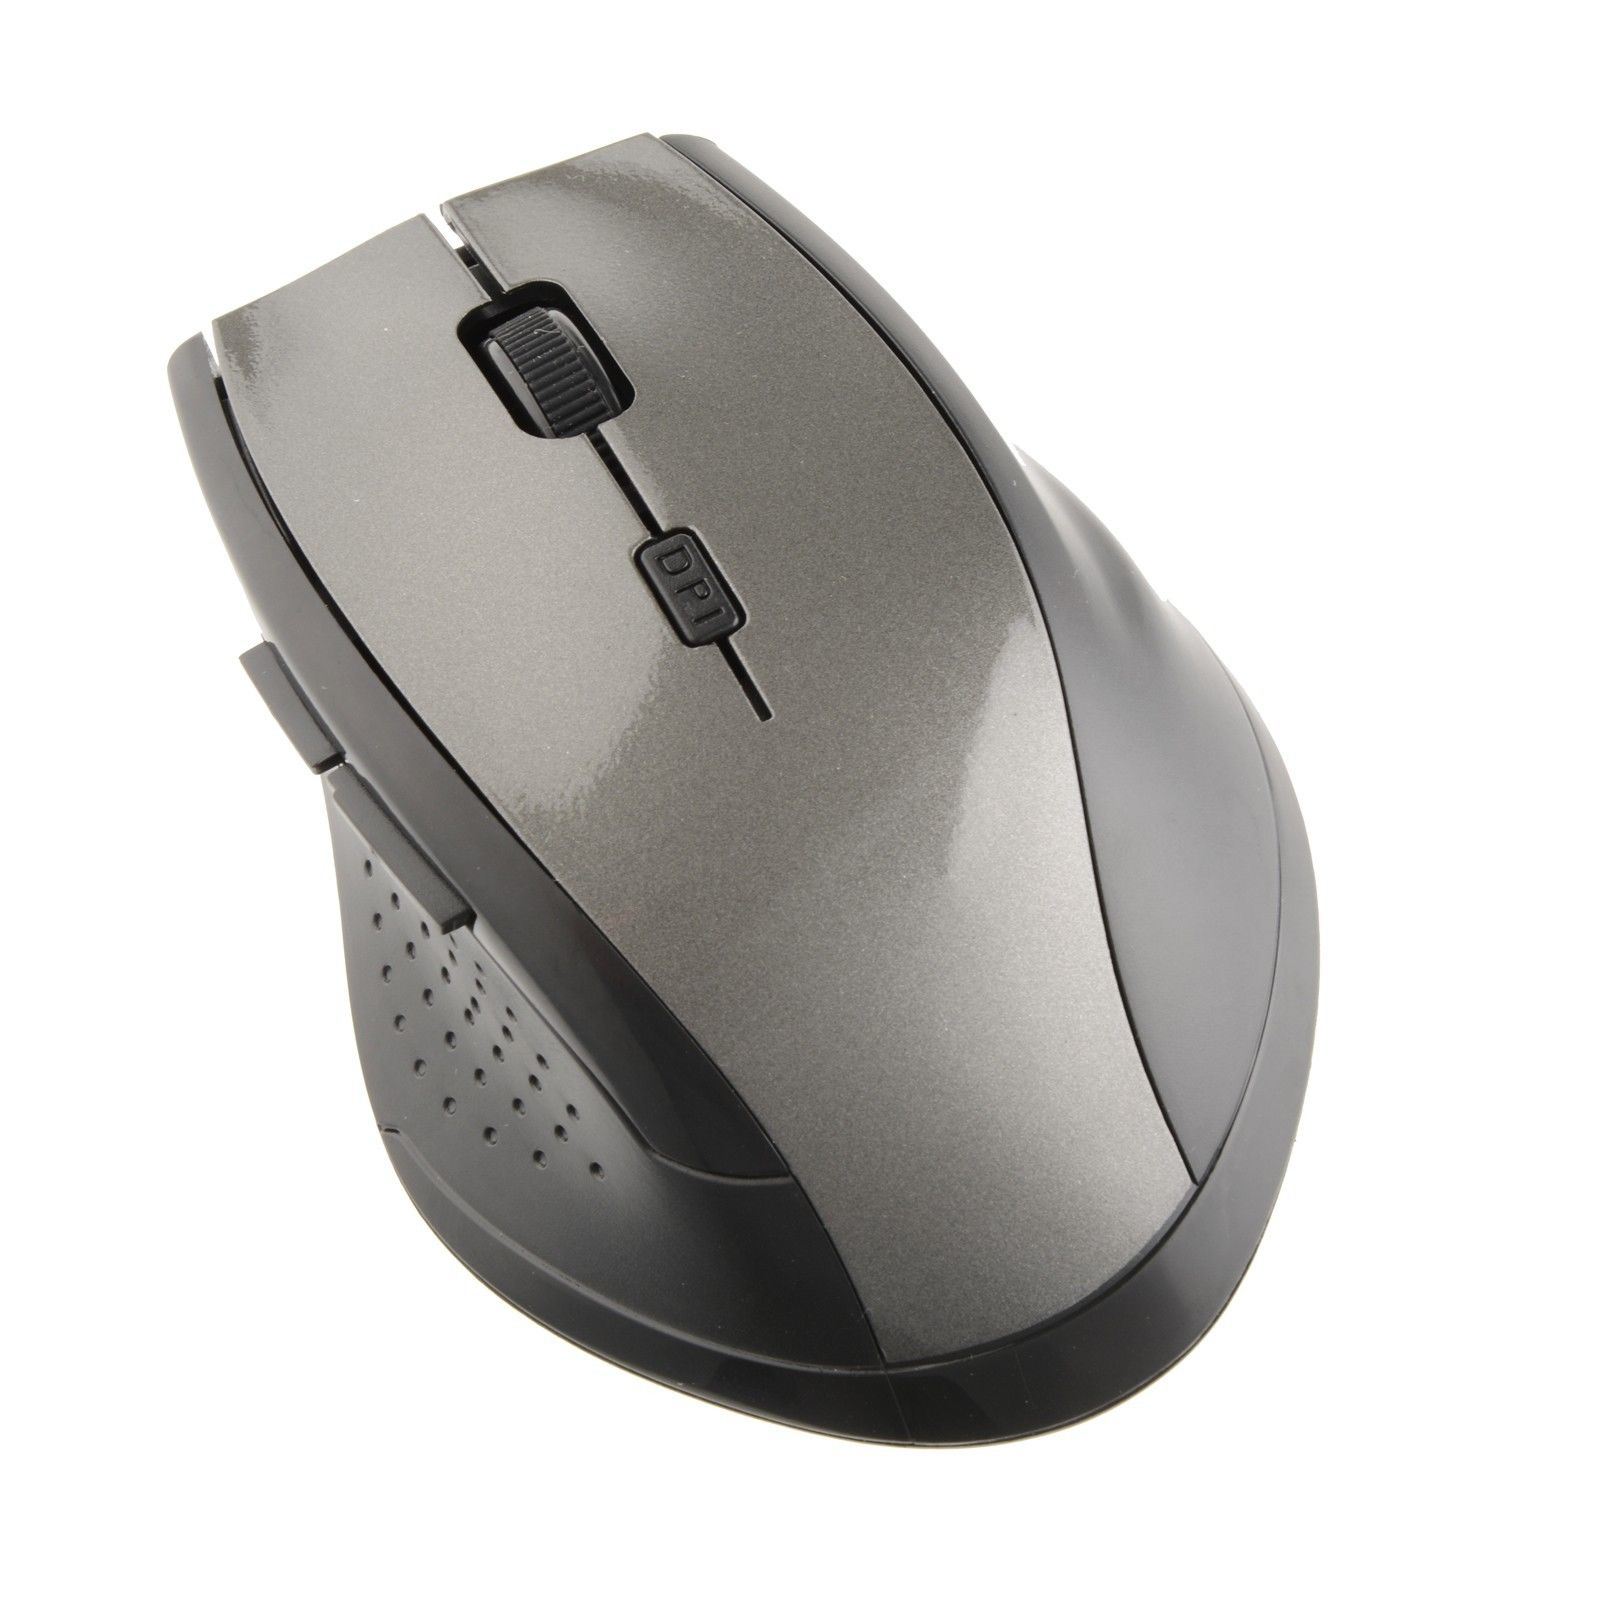 2.4 GHz Optical Wireless Mouse with USB Receiver for Laptop